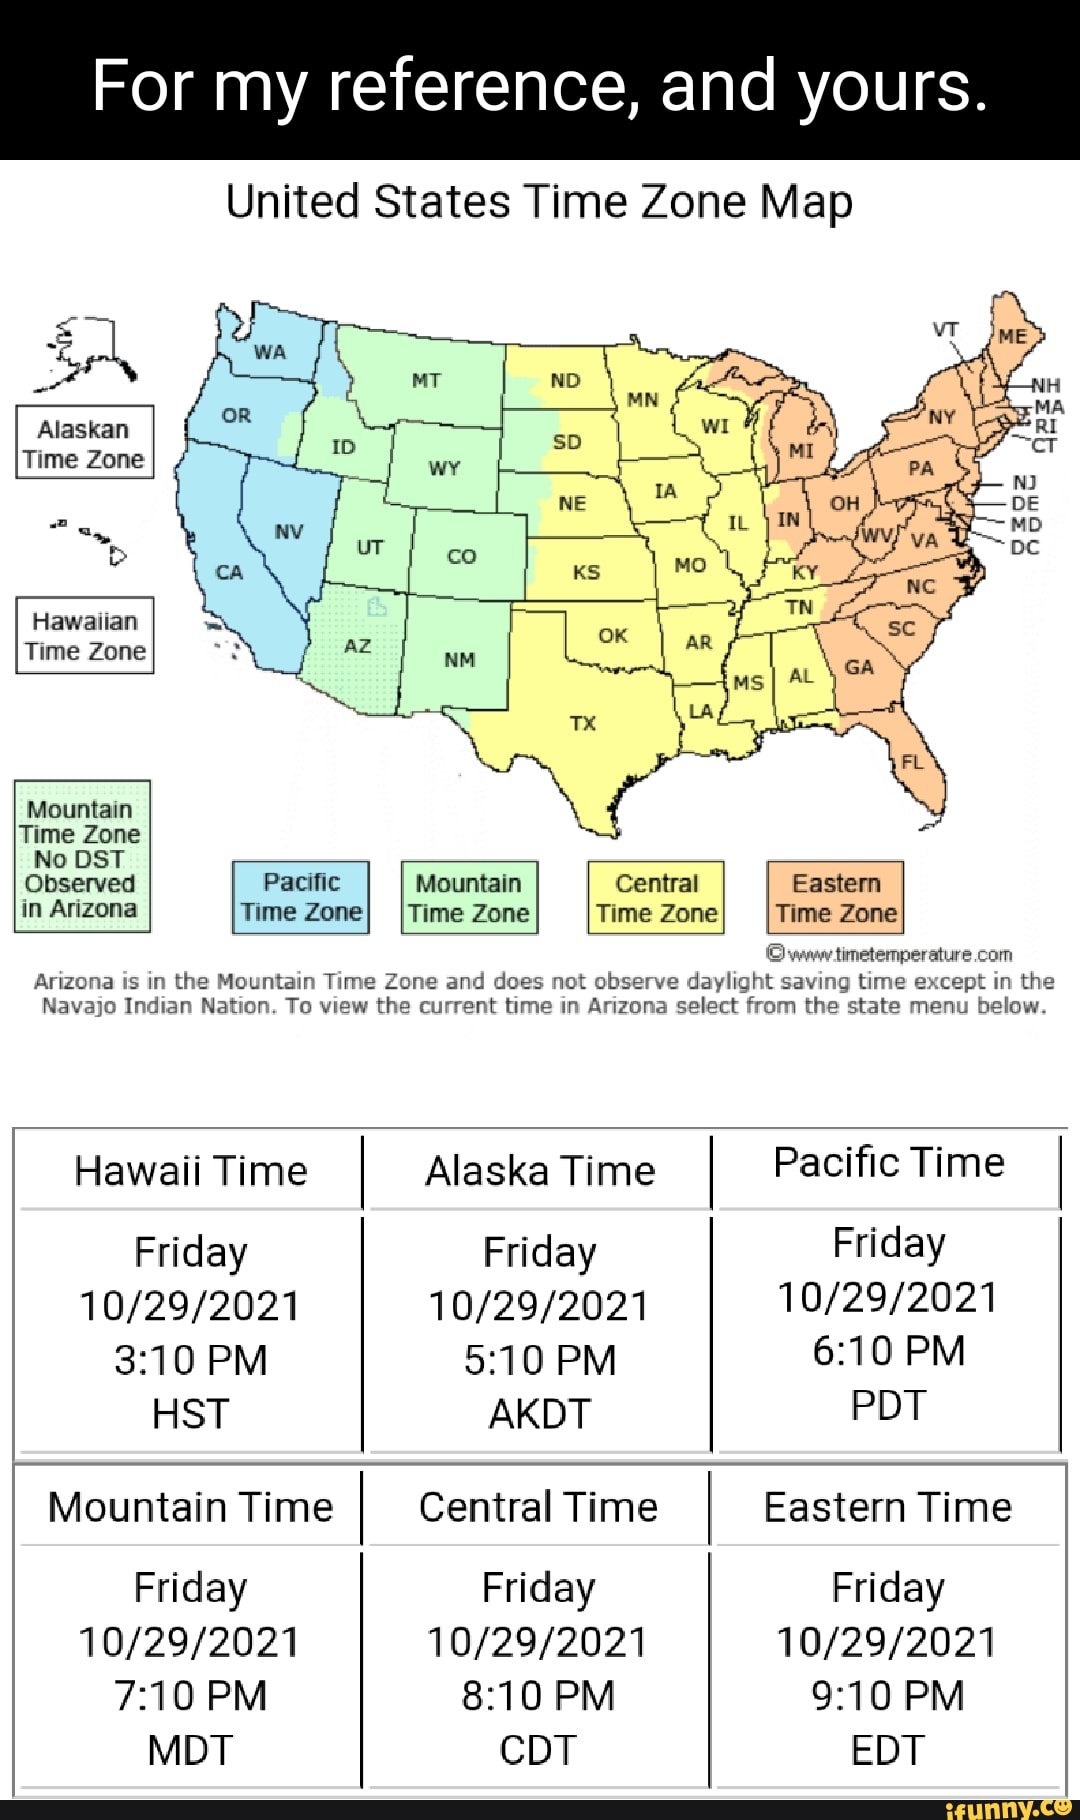 For My Reference, And Yours. United States Time Zone Map Alaskan Time Zone  Hawaiian Time Zone